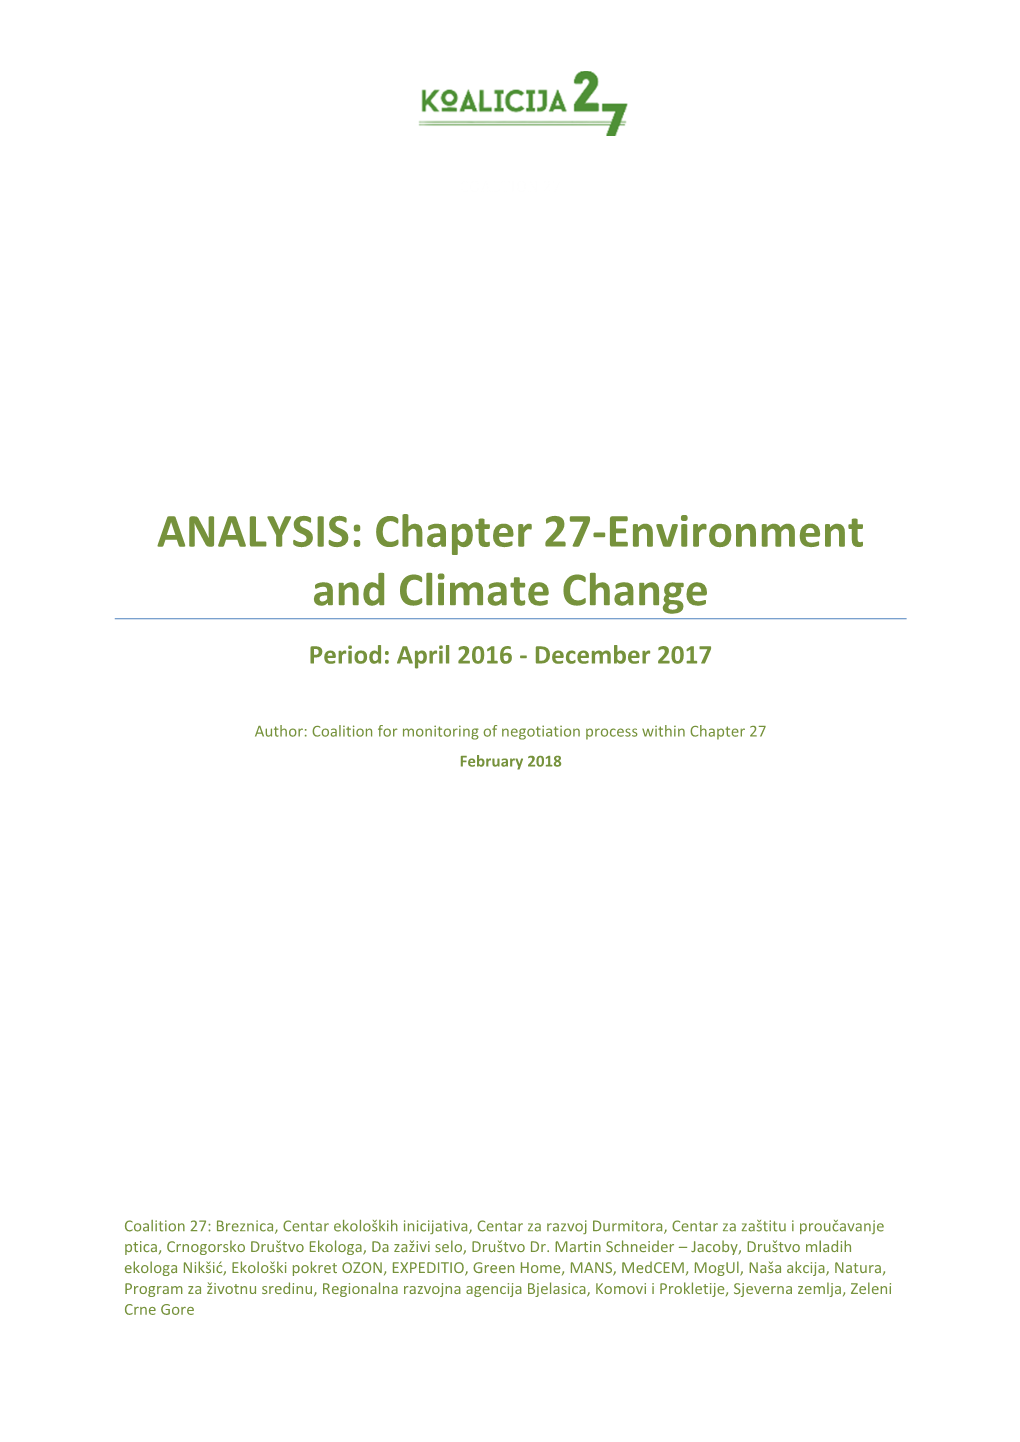 ANALYSIS: Chapter 27-Environment and Climate Change Period: April 2016 - December 2017